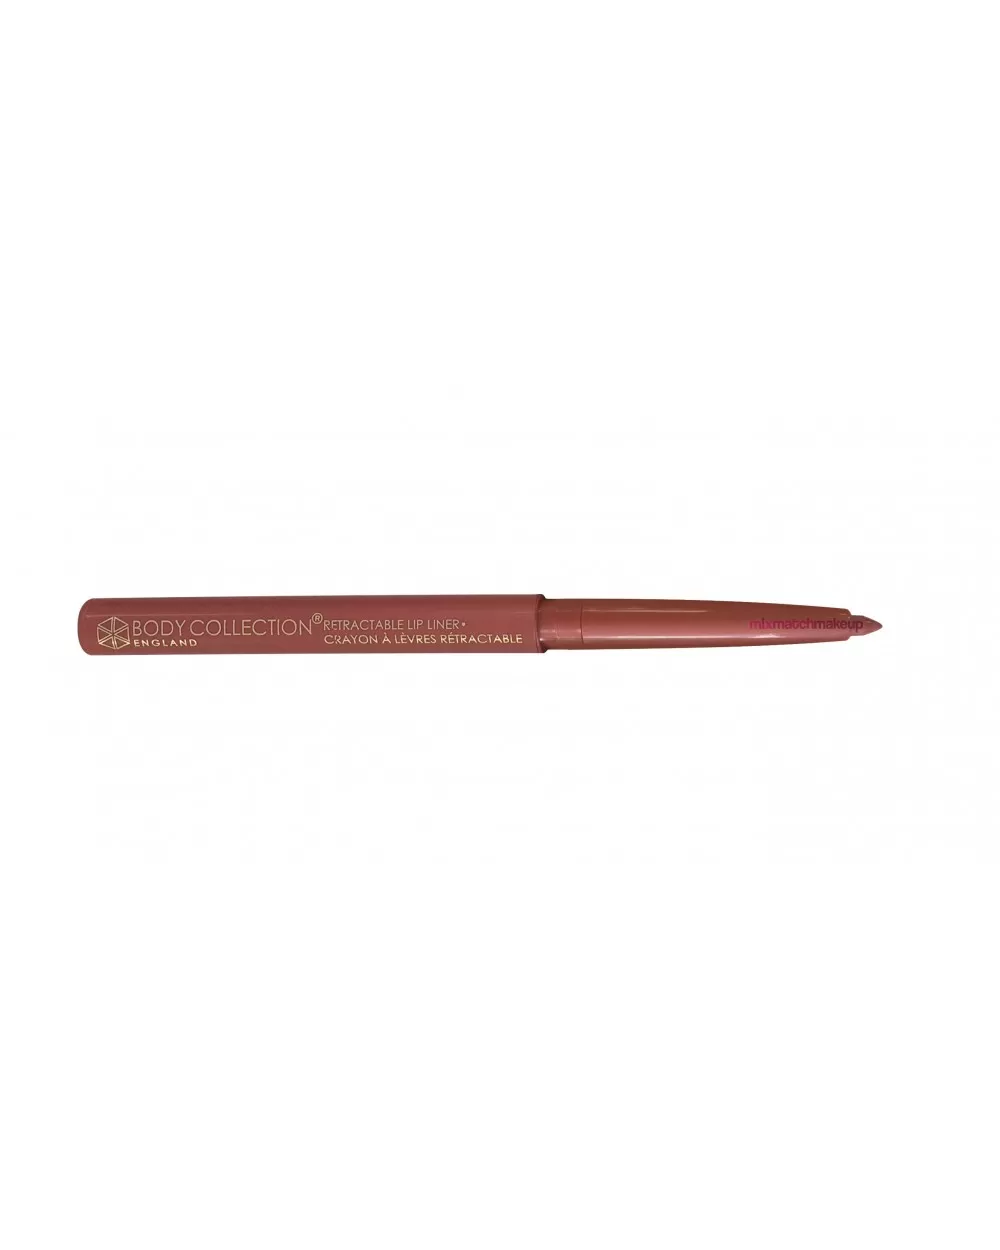 body-collection-lip-liner-caress-4959-1000x1250w